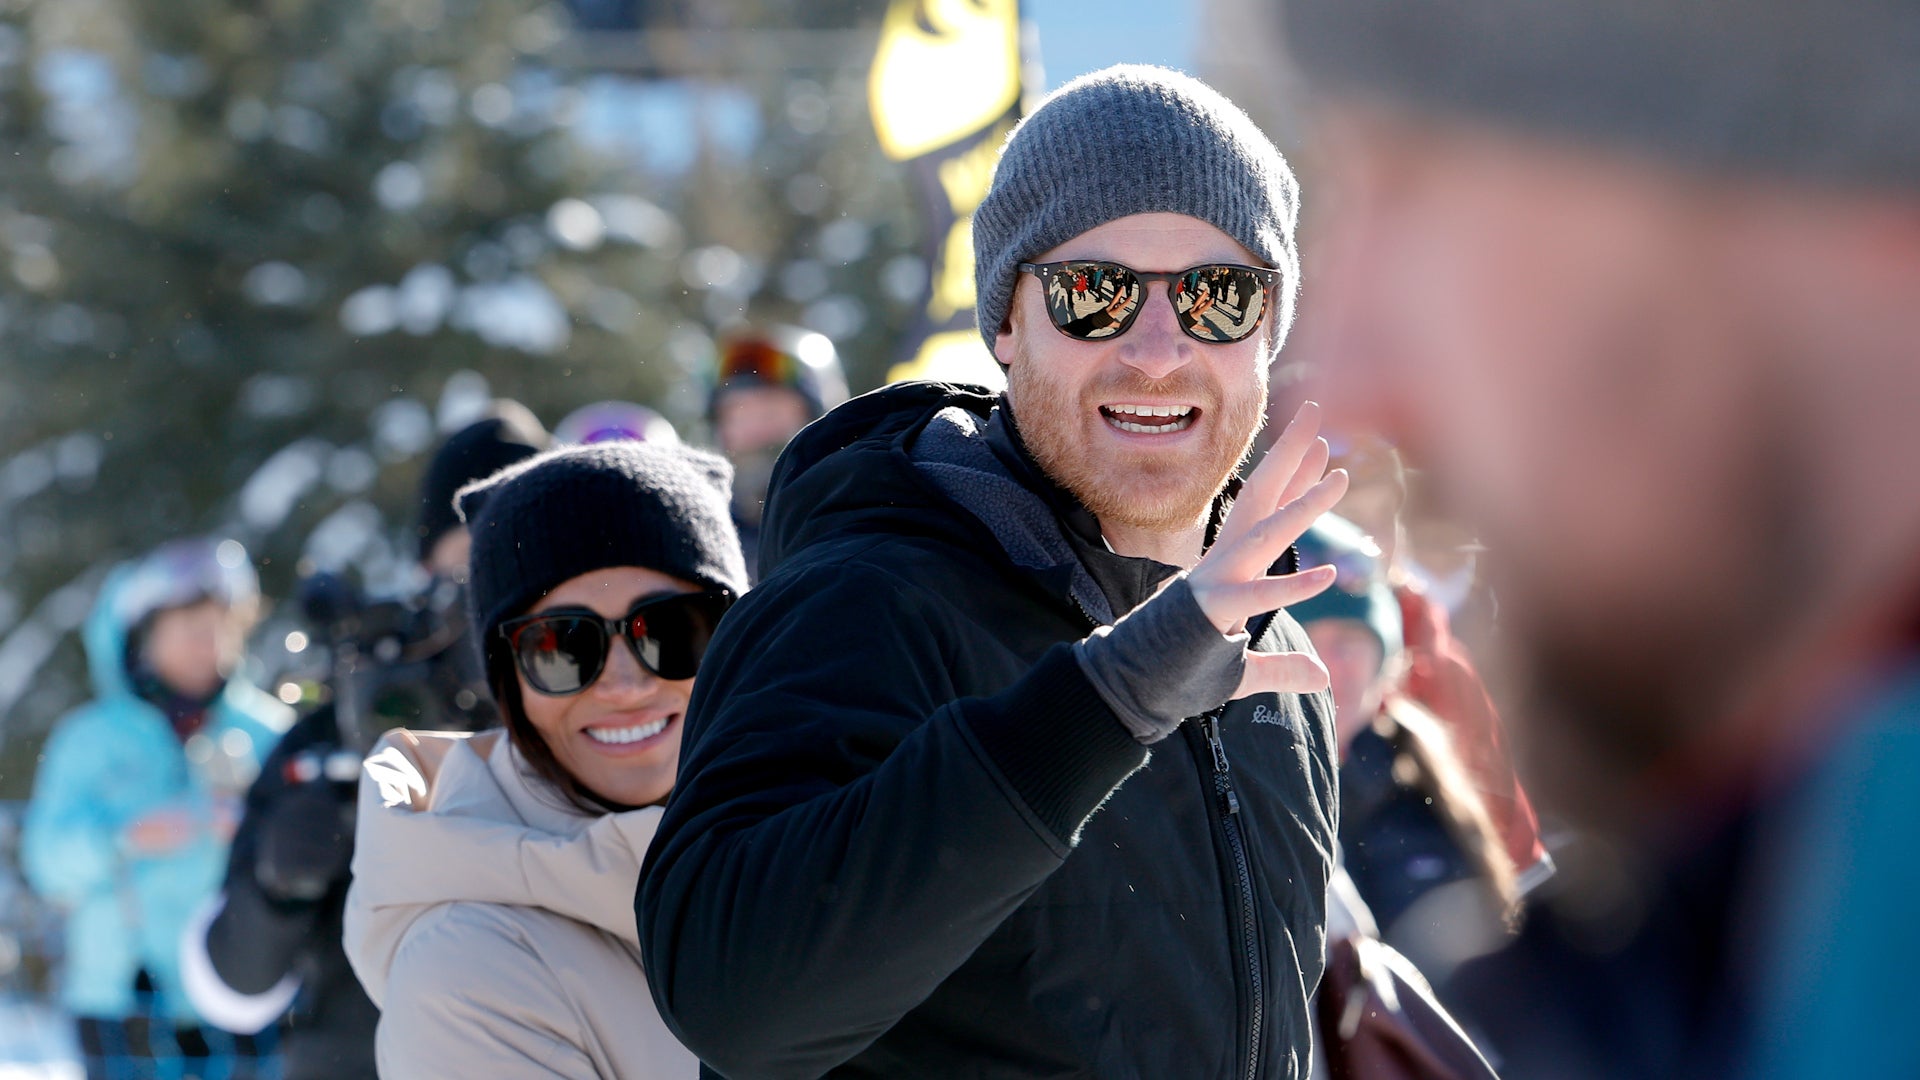 Prince Harry and Meghan Markle hit ski slopes on Invictus Games Canada trip.